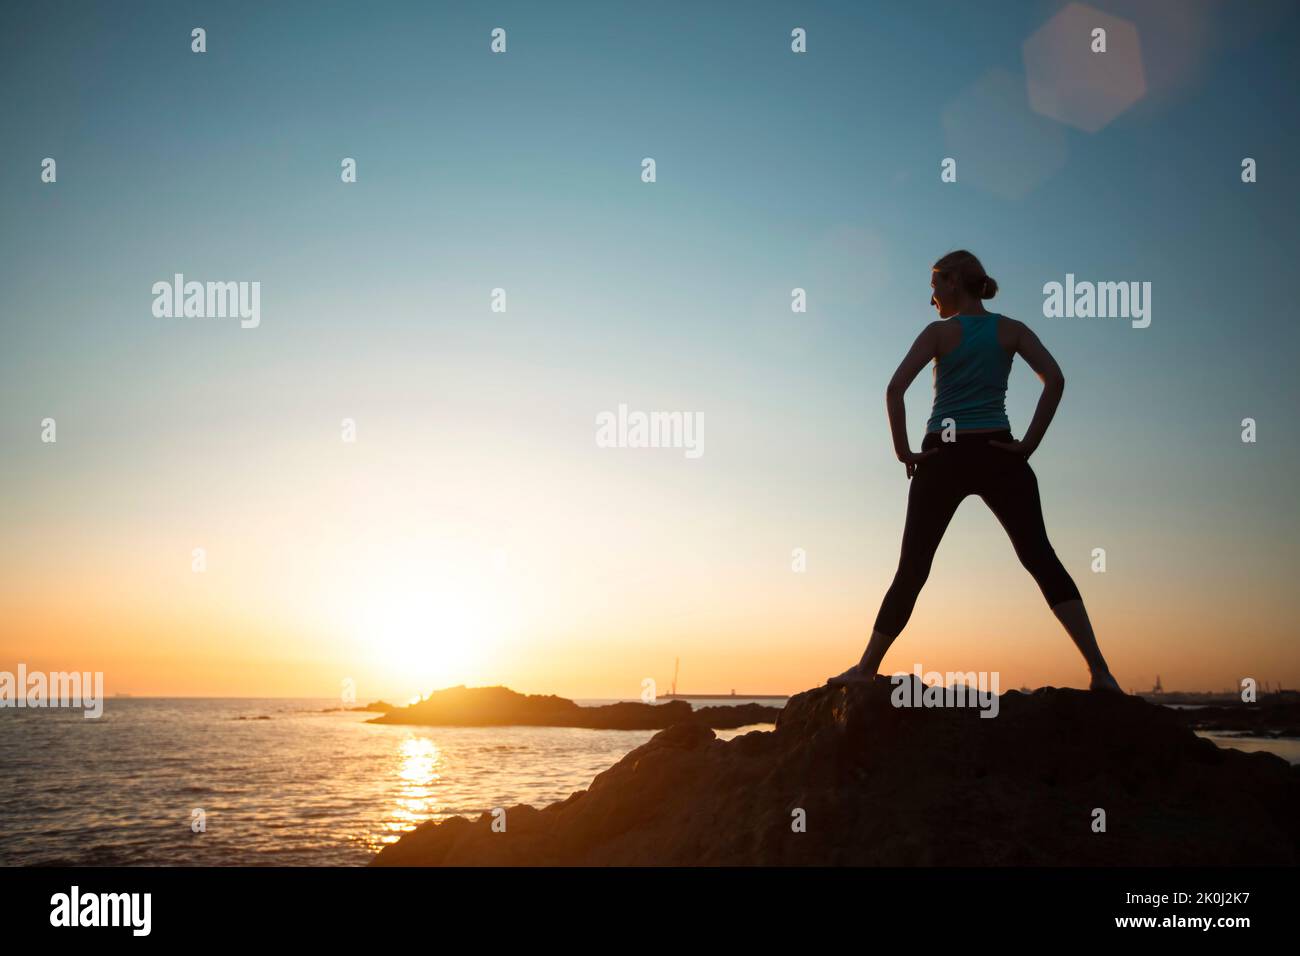 A woman does gymnastic yoga by the ocean in the setting sun. Stock Photo